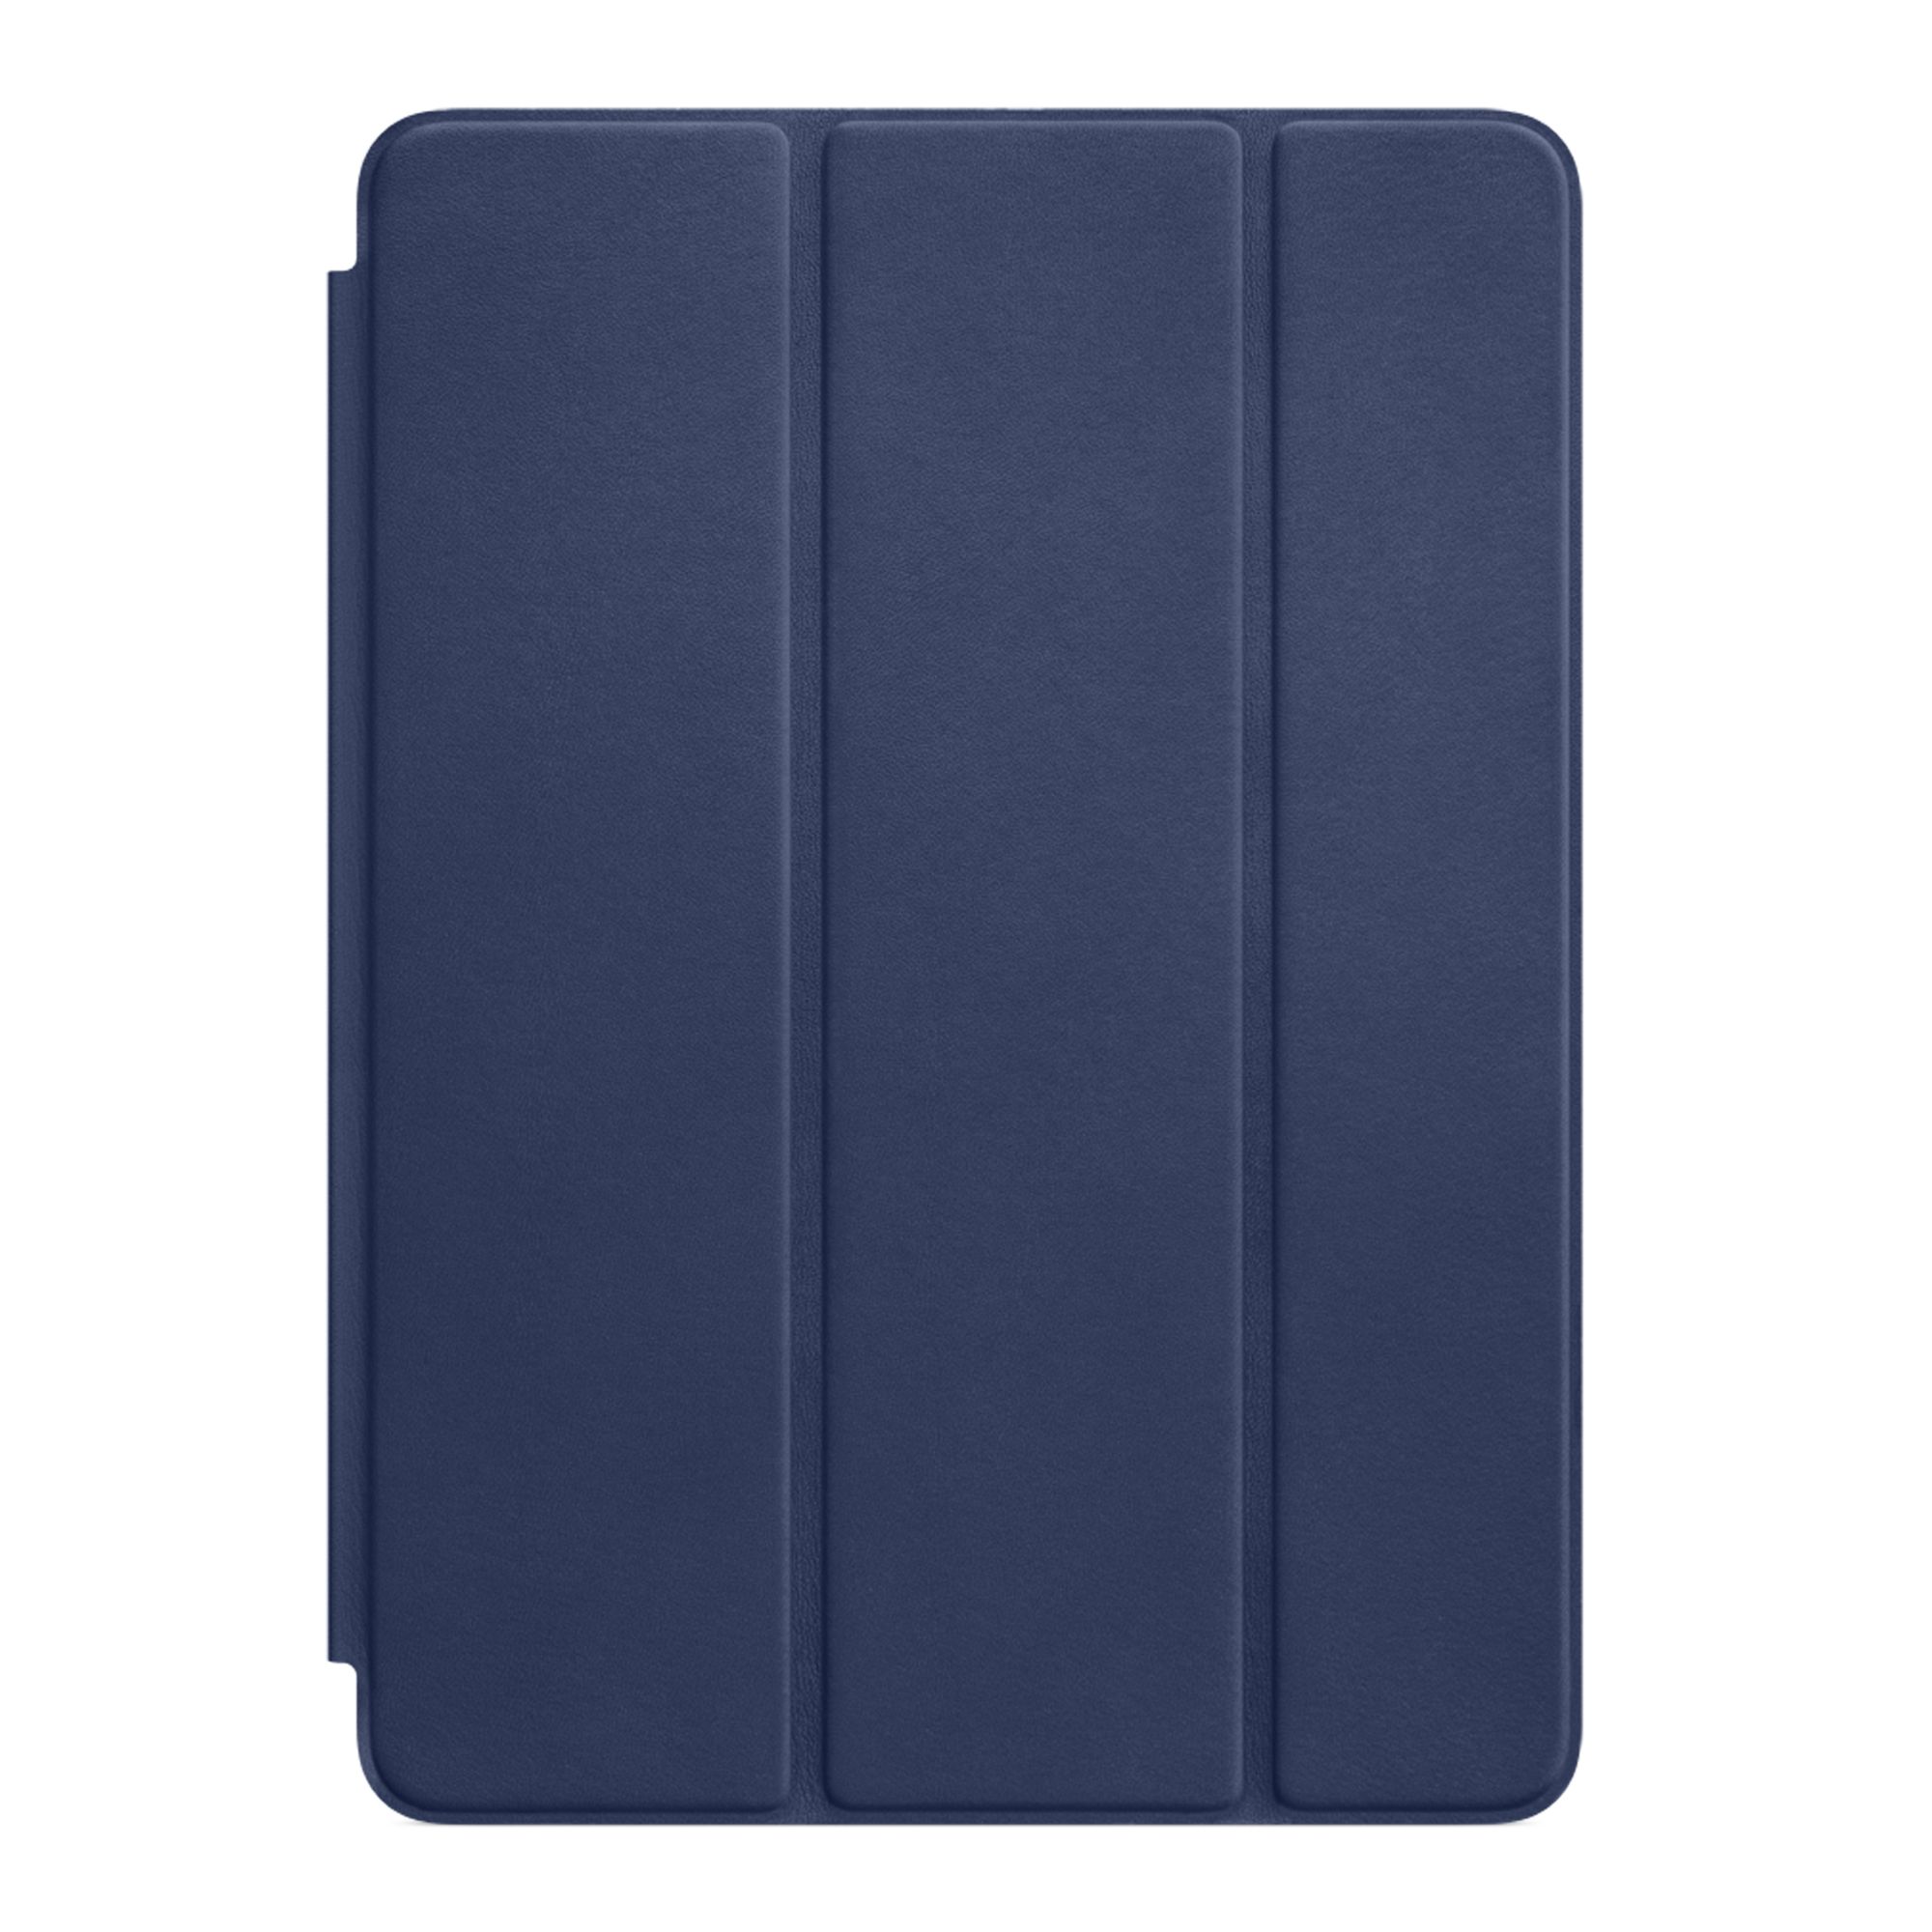 Apple Leather Smart Case for iPad Air 2